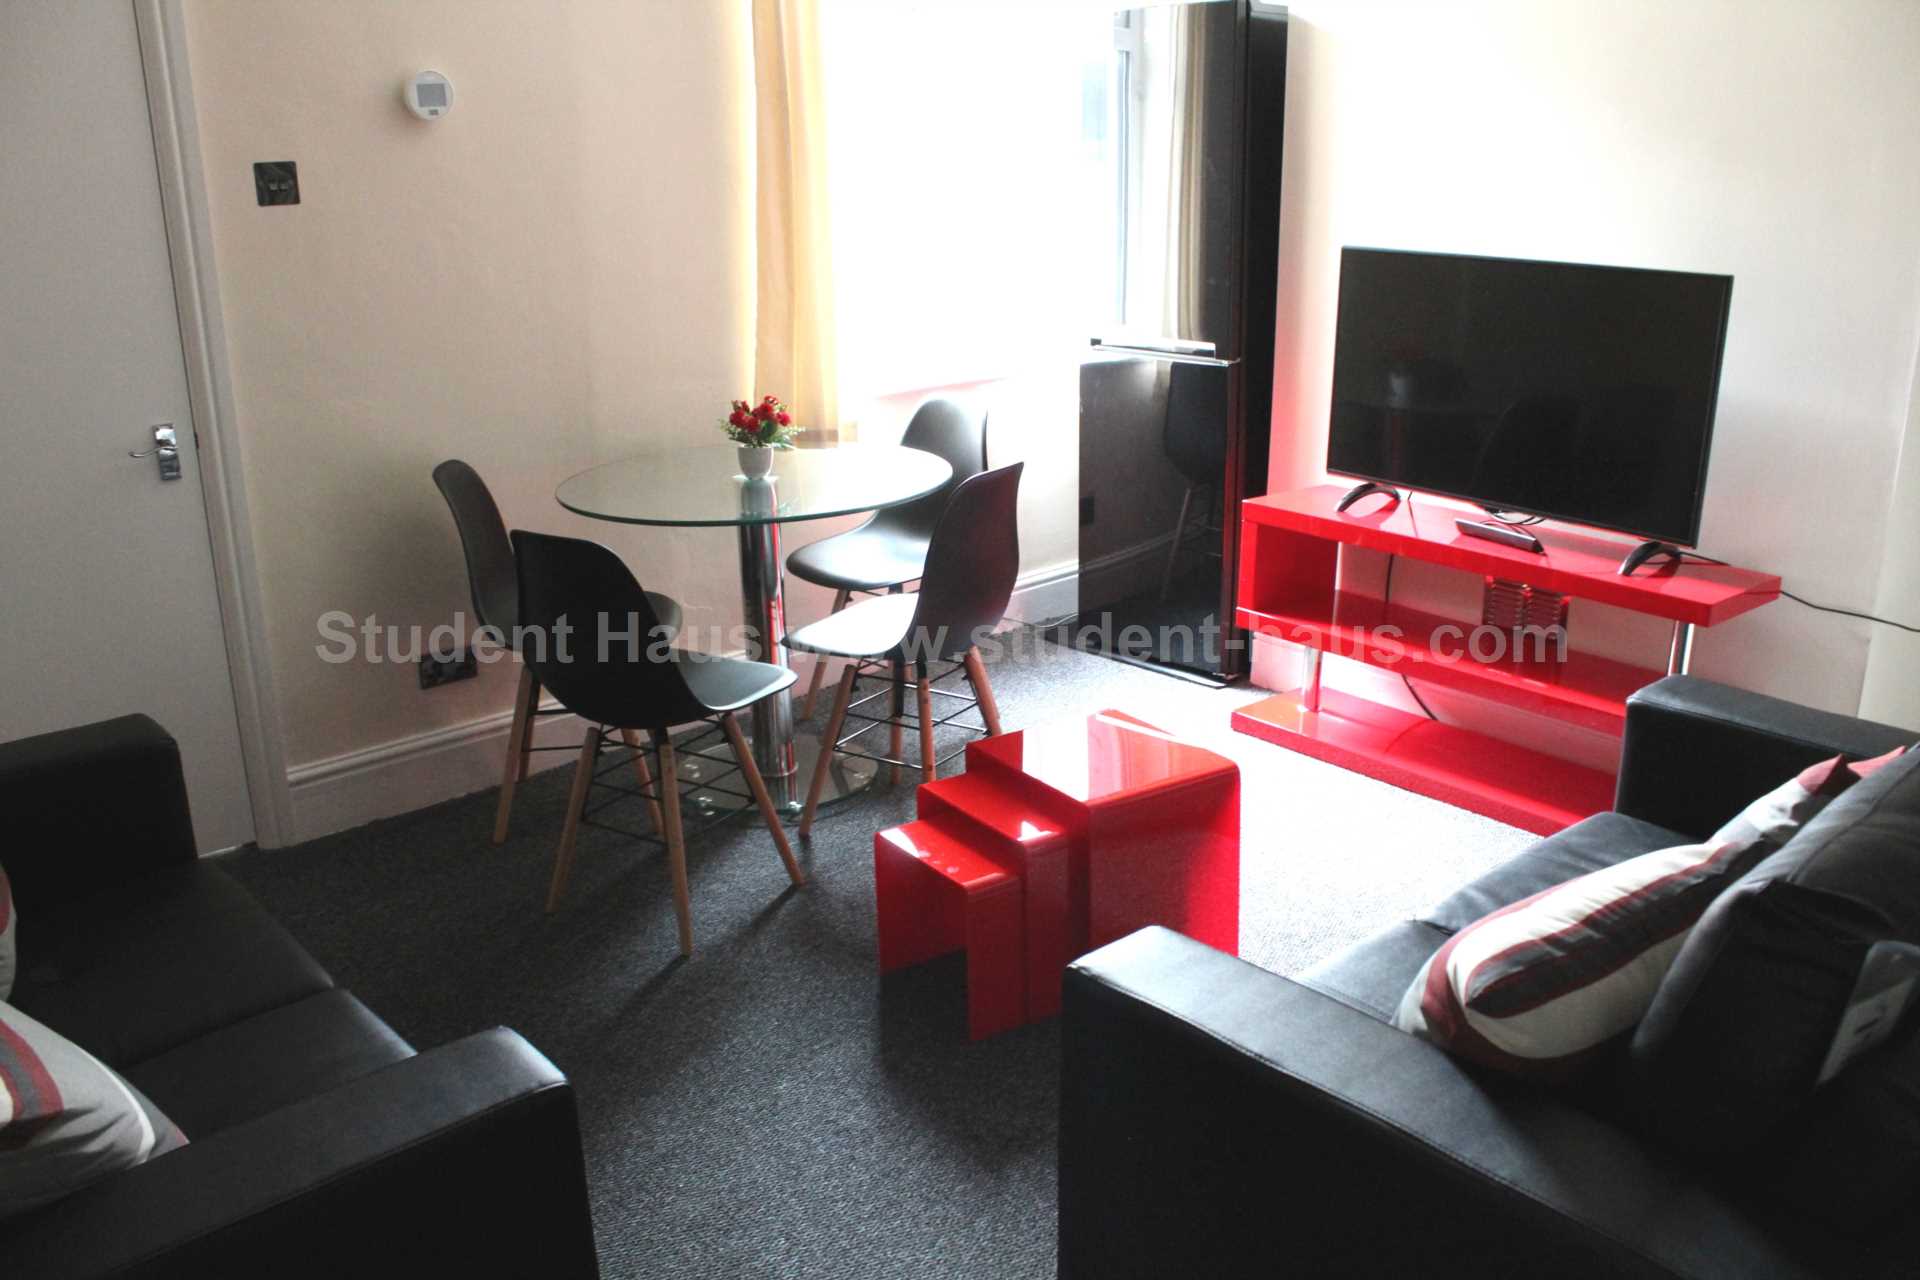 3 bed Room for rent in Salford. From Student Haus